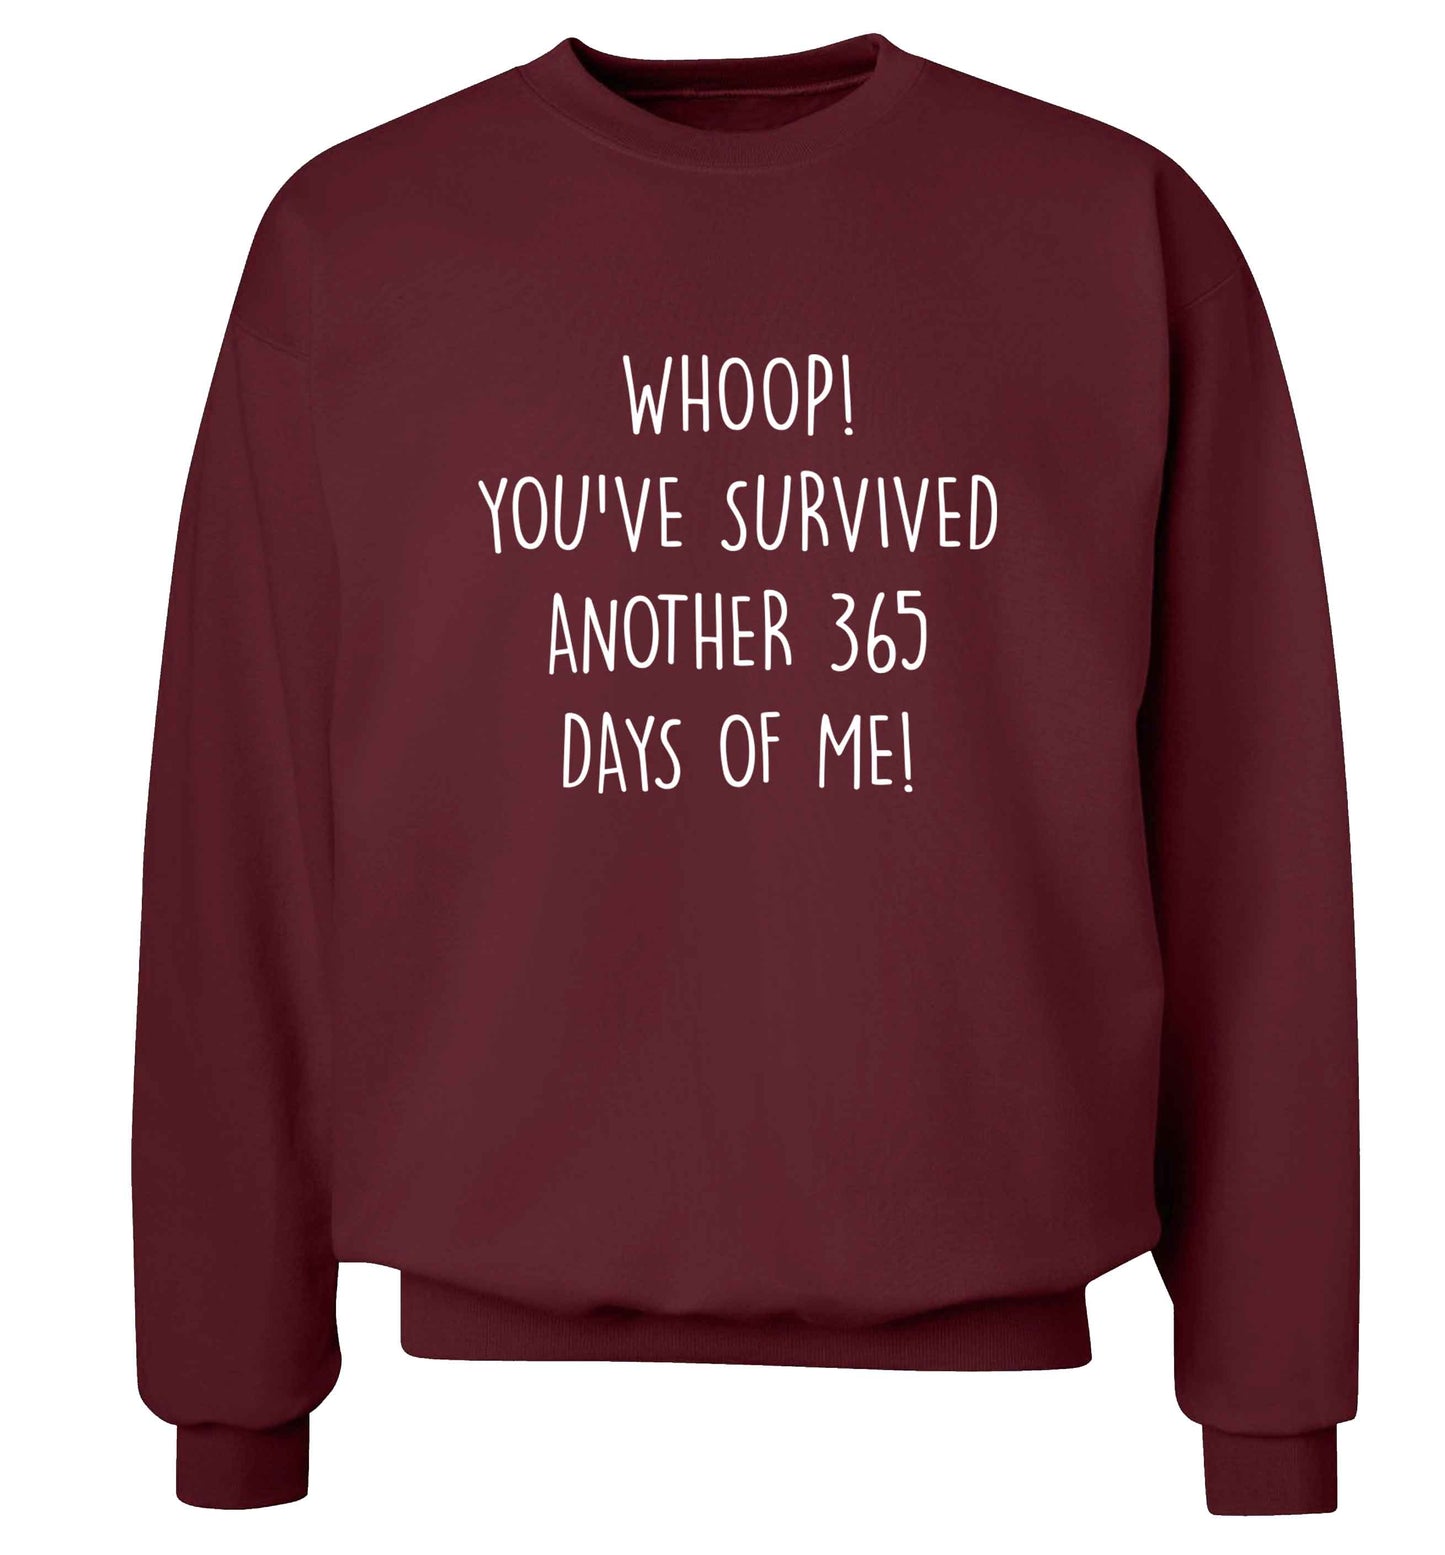 Whoop! You've survived another 365 days with me! adult's unisex maroon sweater 2XL